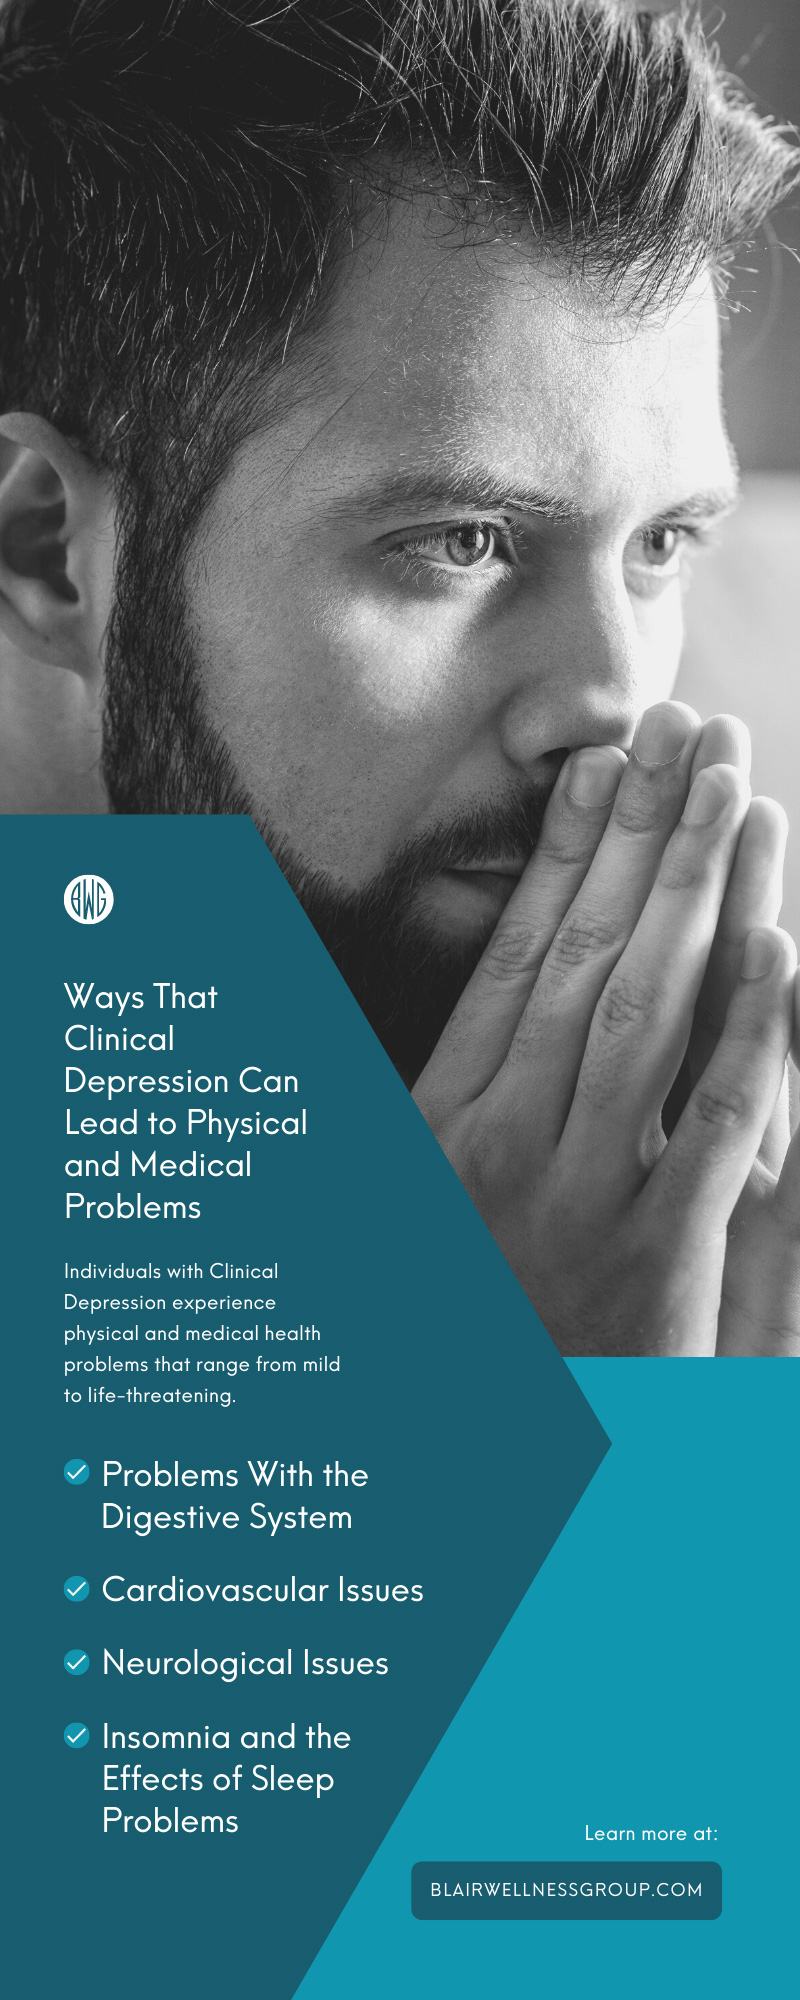 Ways That Clinical Depression Can Lead to Physical and Medical Problems